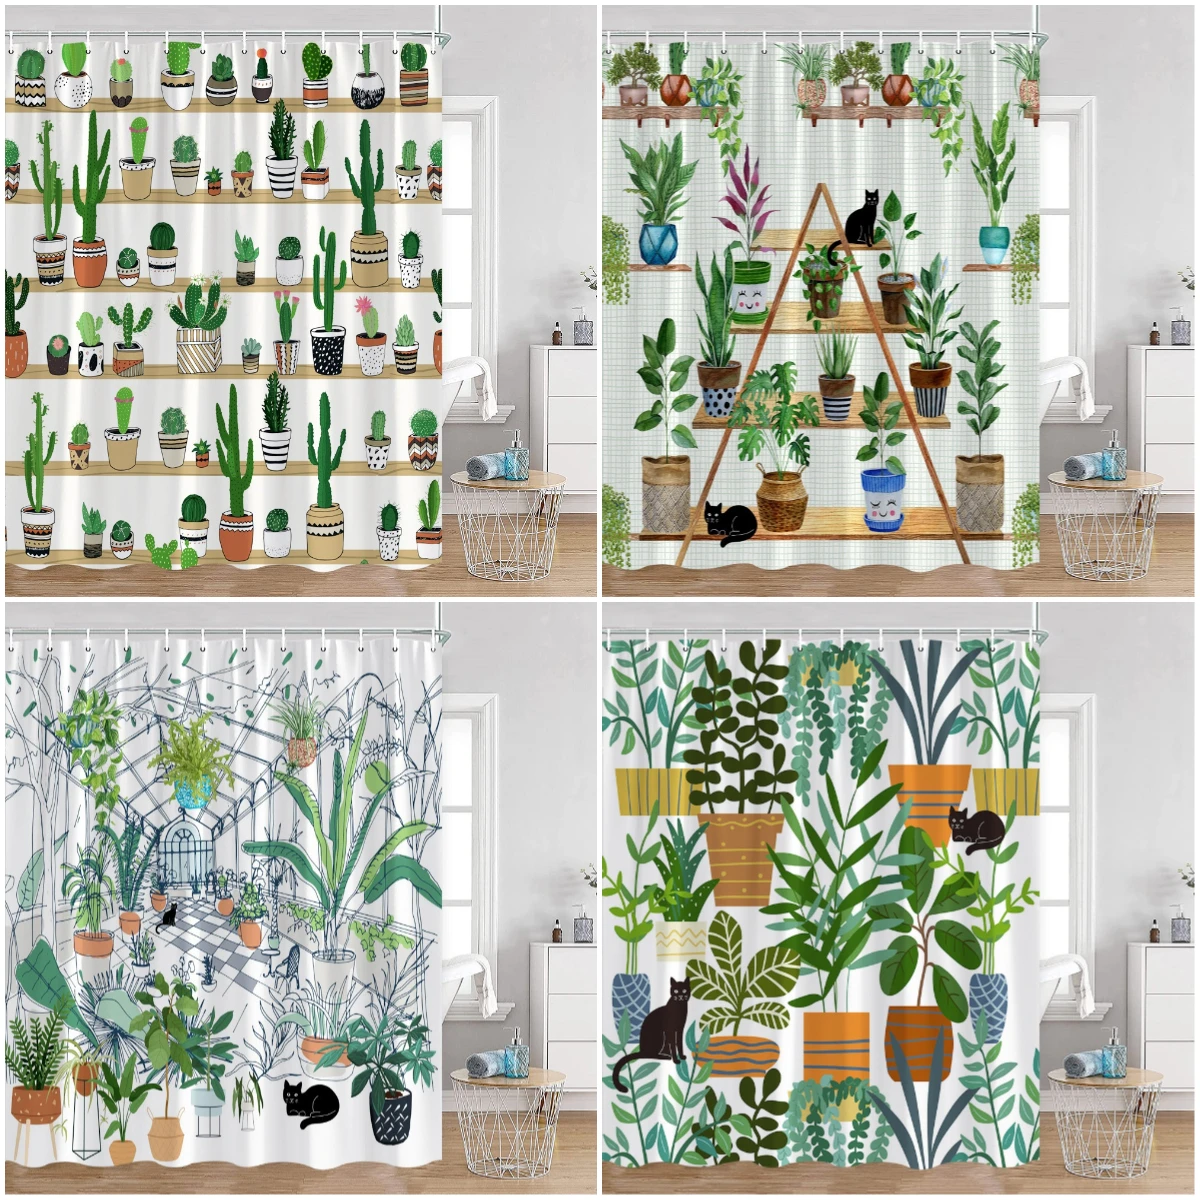 

Green Potted Plants Shower Curtains Cartoon Cats Hanging Tropical Leaves Decorations for Bath Polyester Fabric Bathroom Curtain